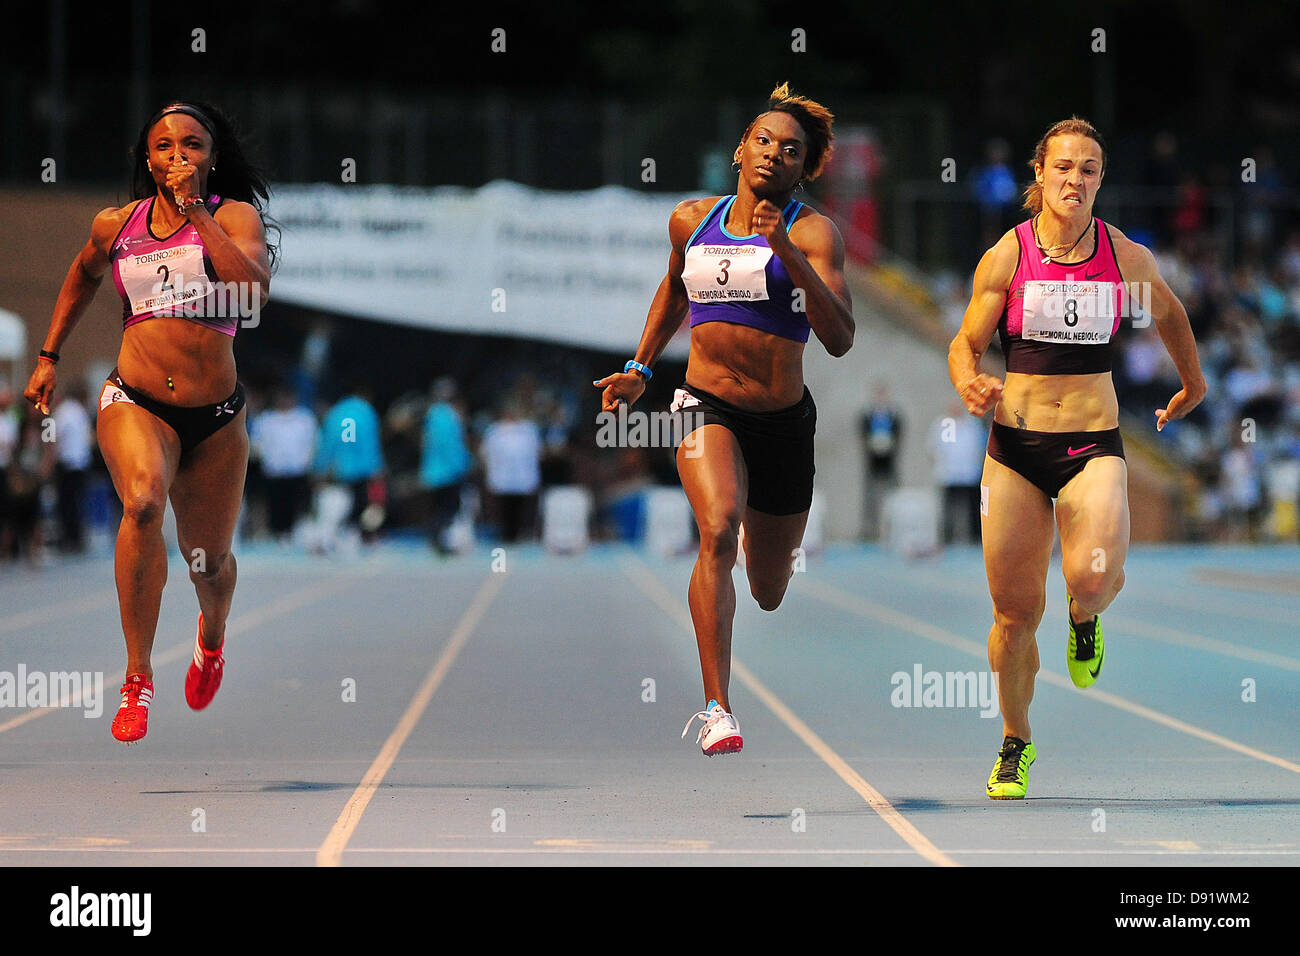 08.06.2013 Torino, Italy. Chauntae Bayne of the USA wins 100m before Olesya Povh of Ukraine and Aleen Bailey of the USA during the International Athletics meeting Memorial Primo Nebiolo from the Stadio Primo Nebiolo. Stock Photo